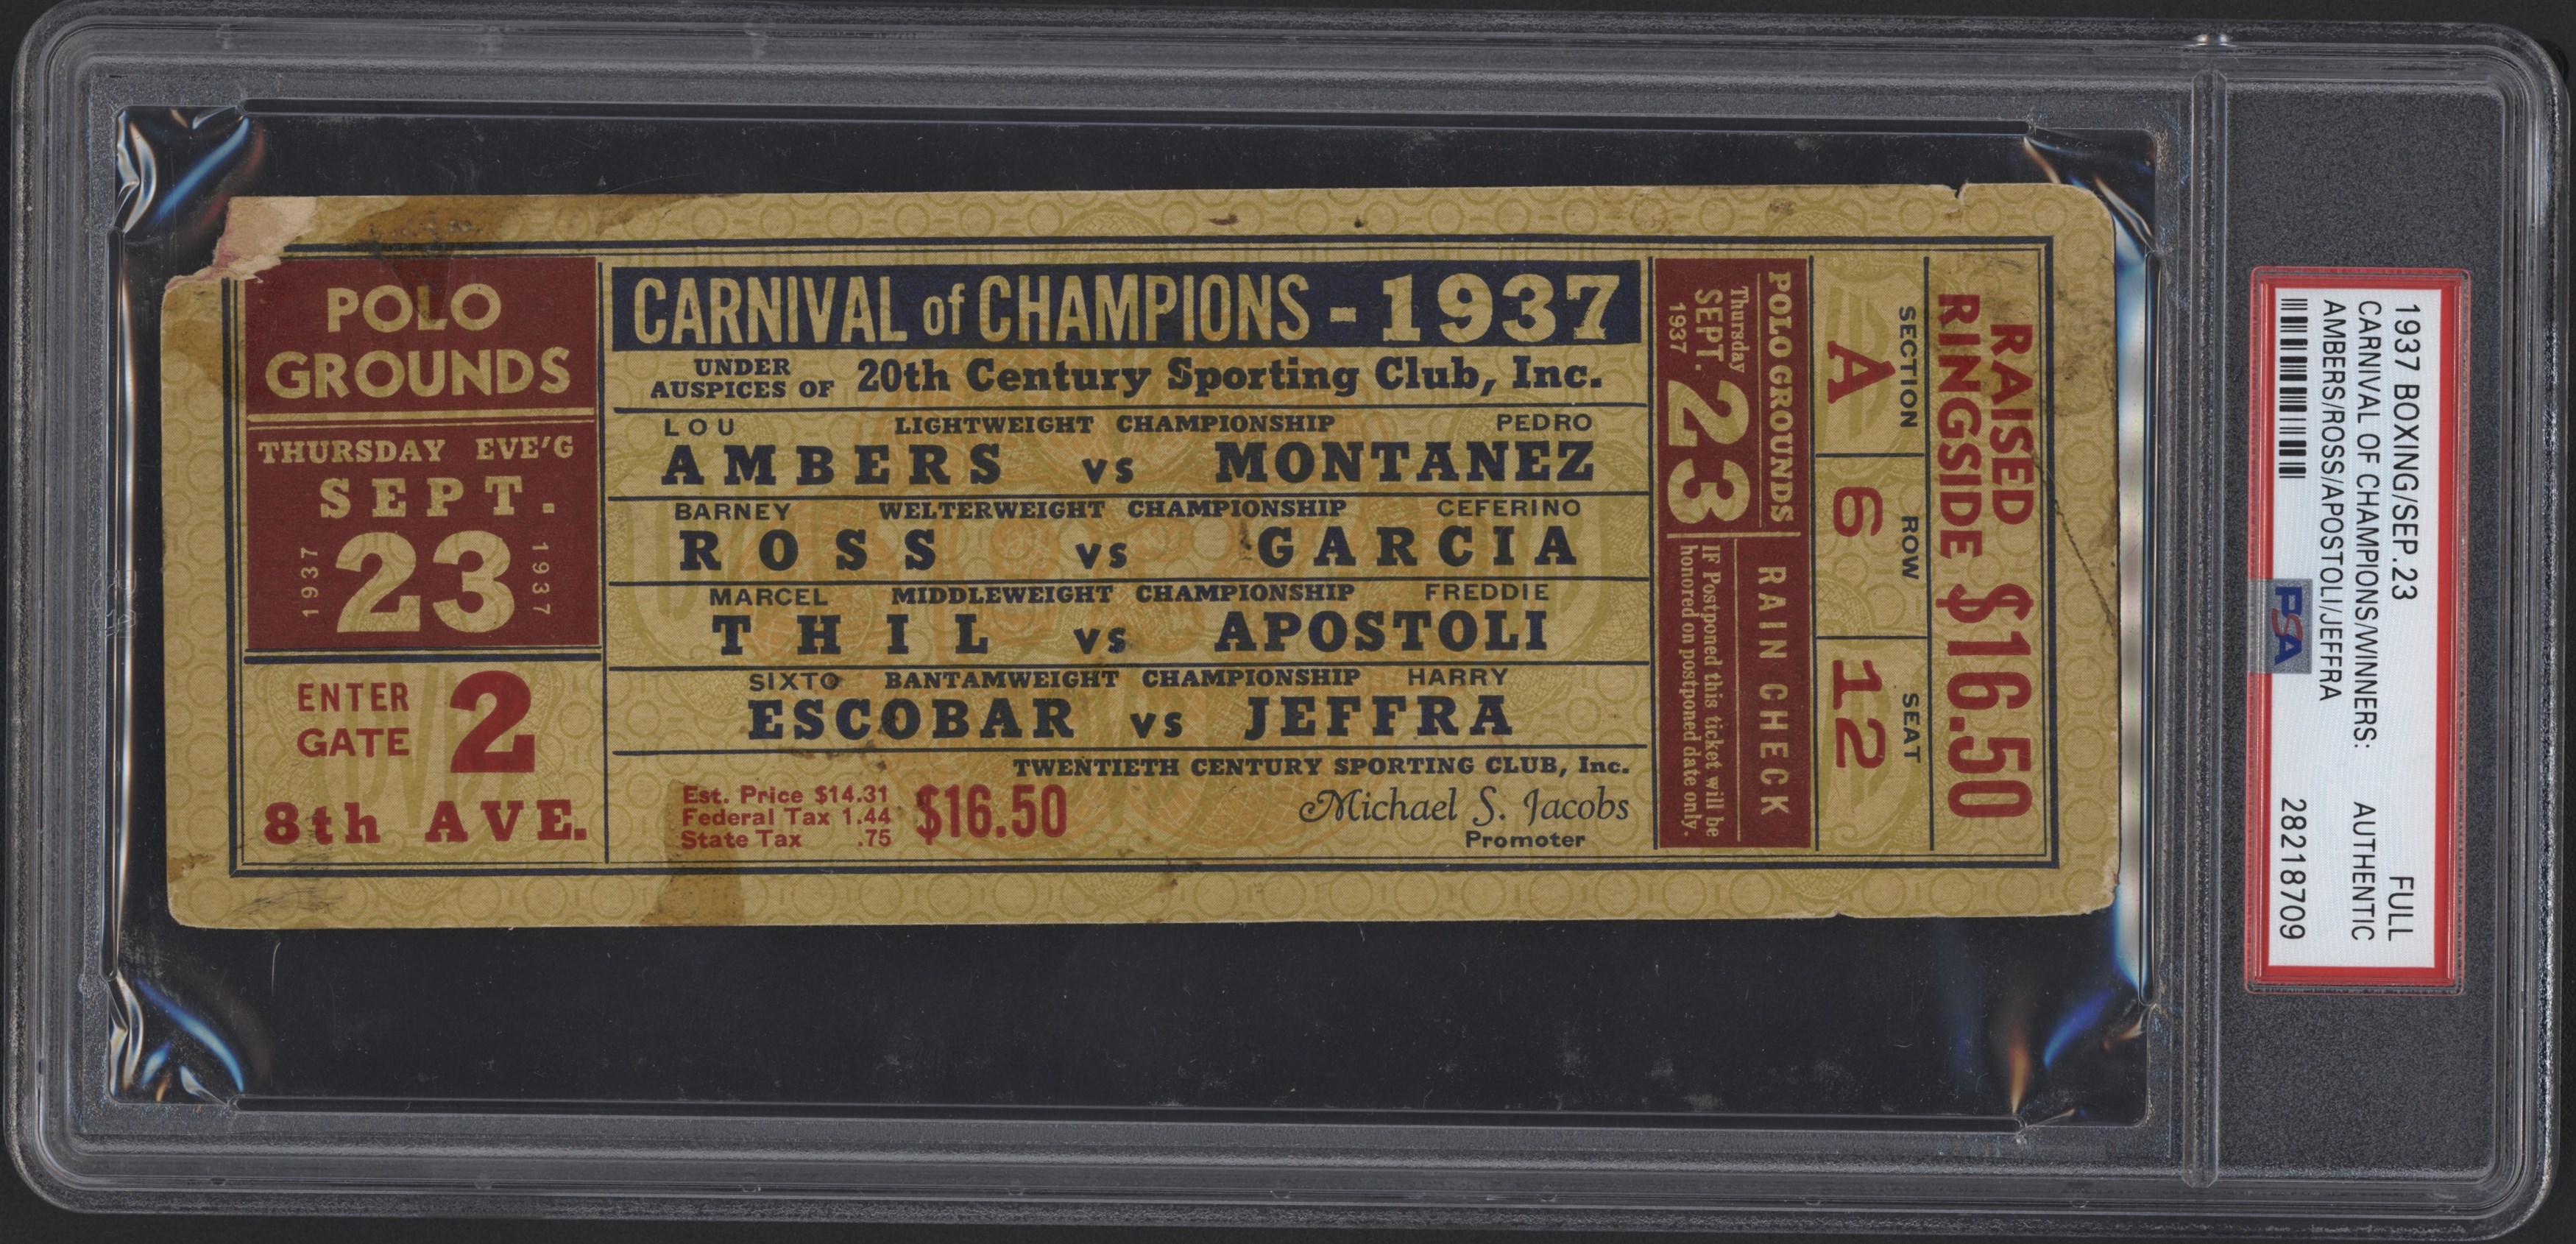 - 1937 Carnival of Champions Full Ticket